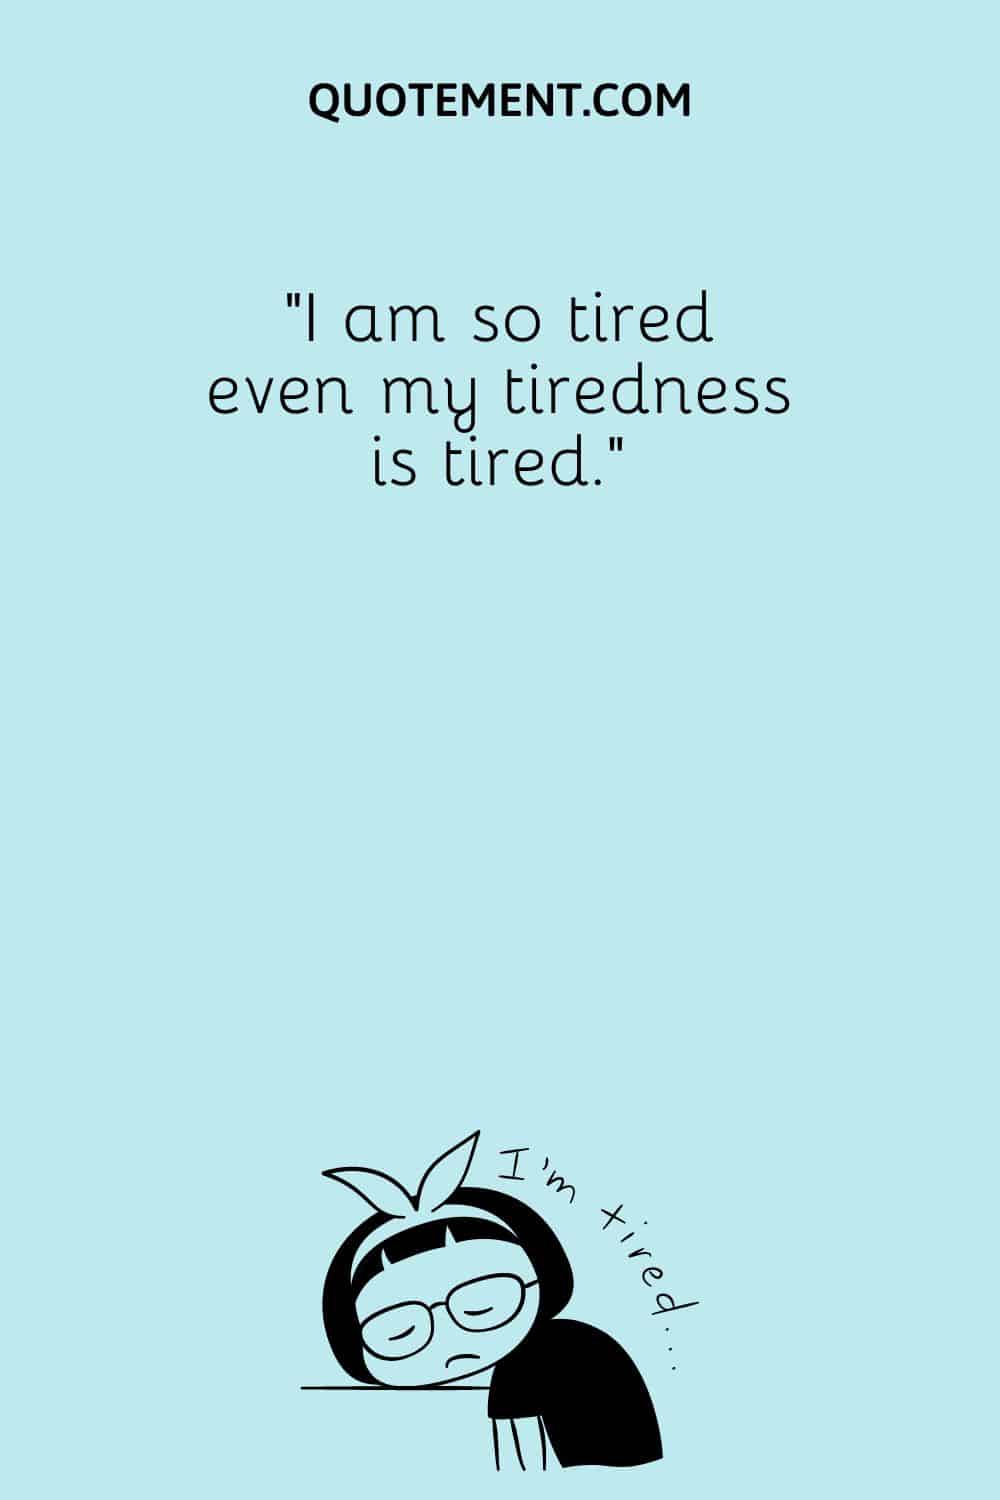 I am so tired even my tiredness is tired